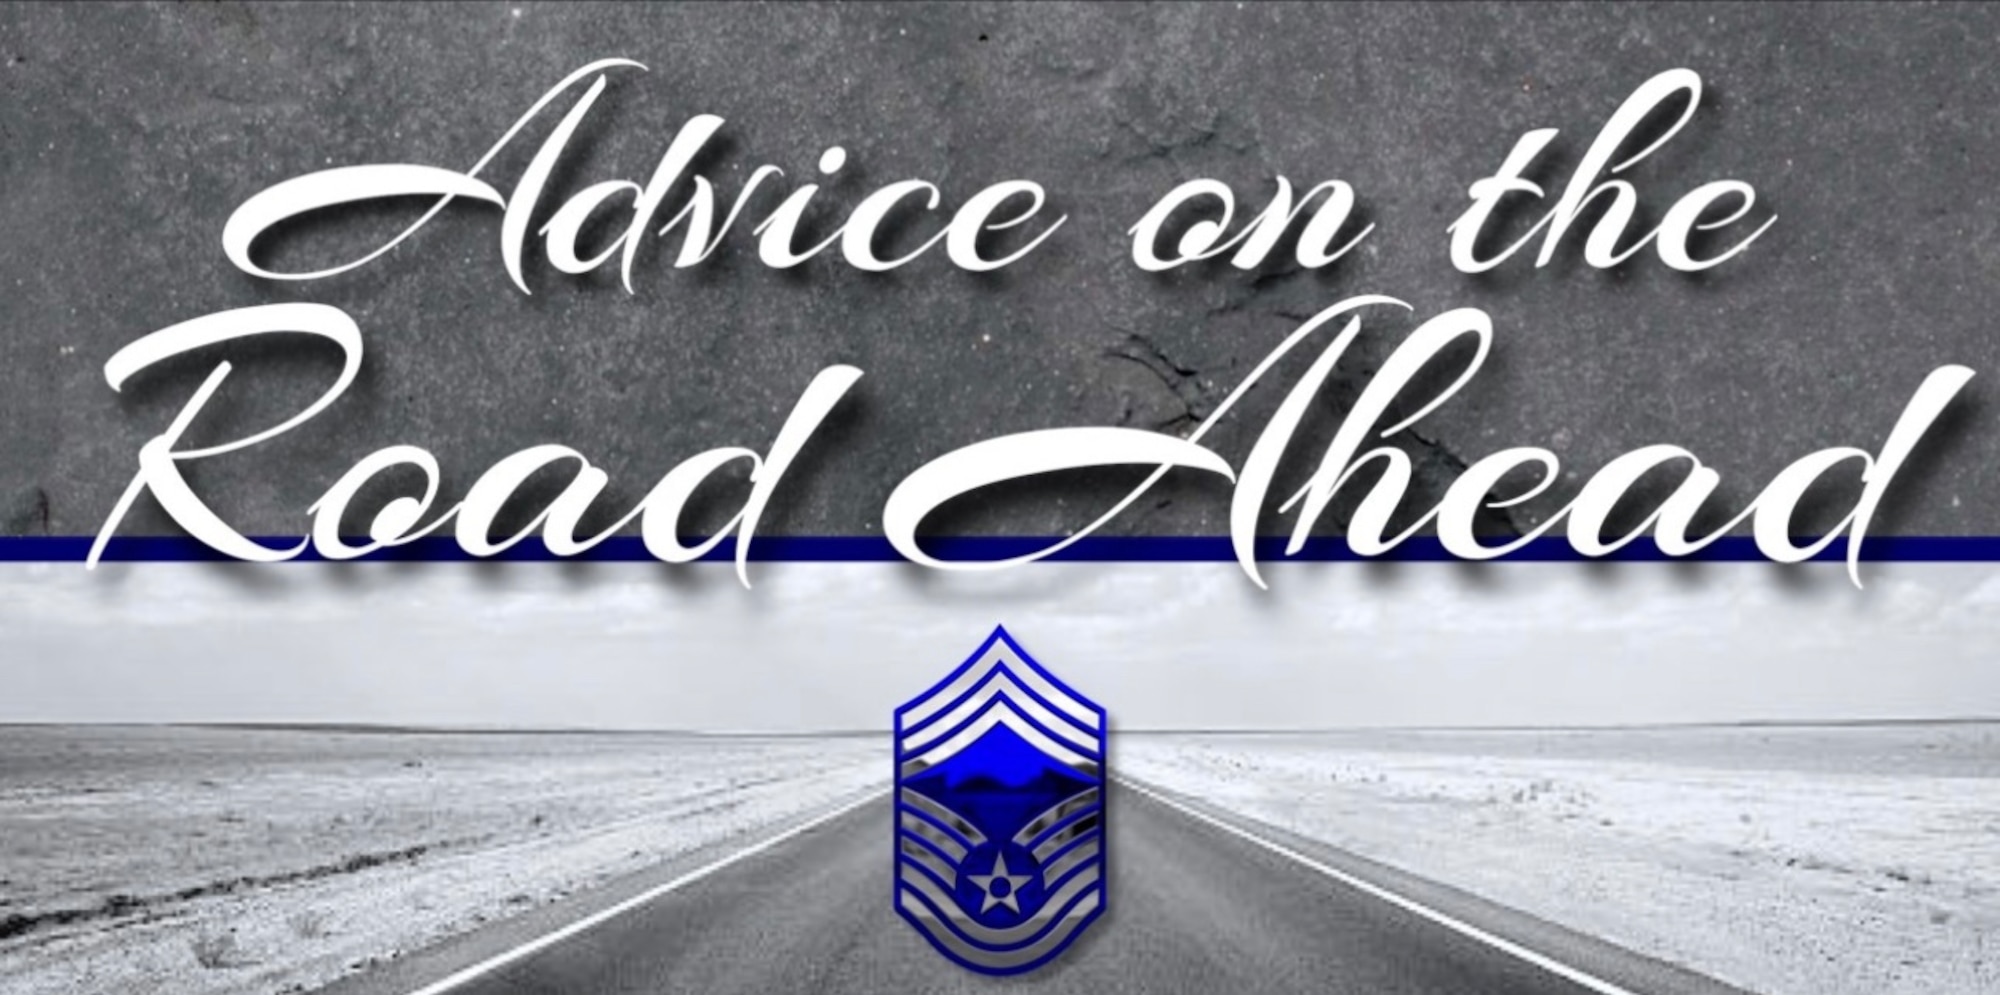 Advice on the road ahead  graphic